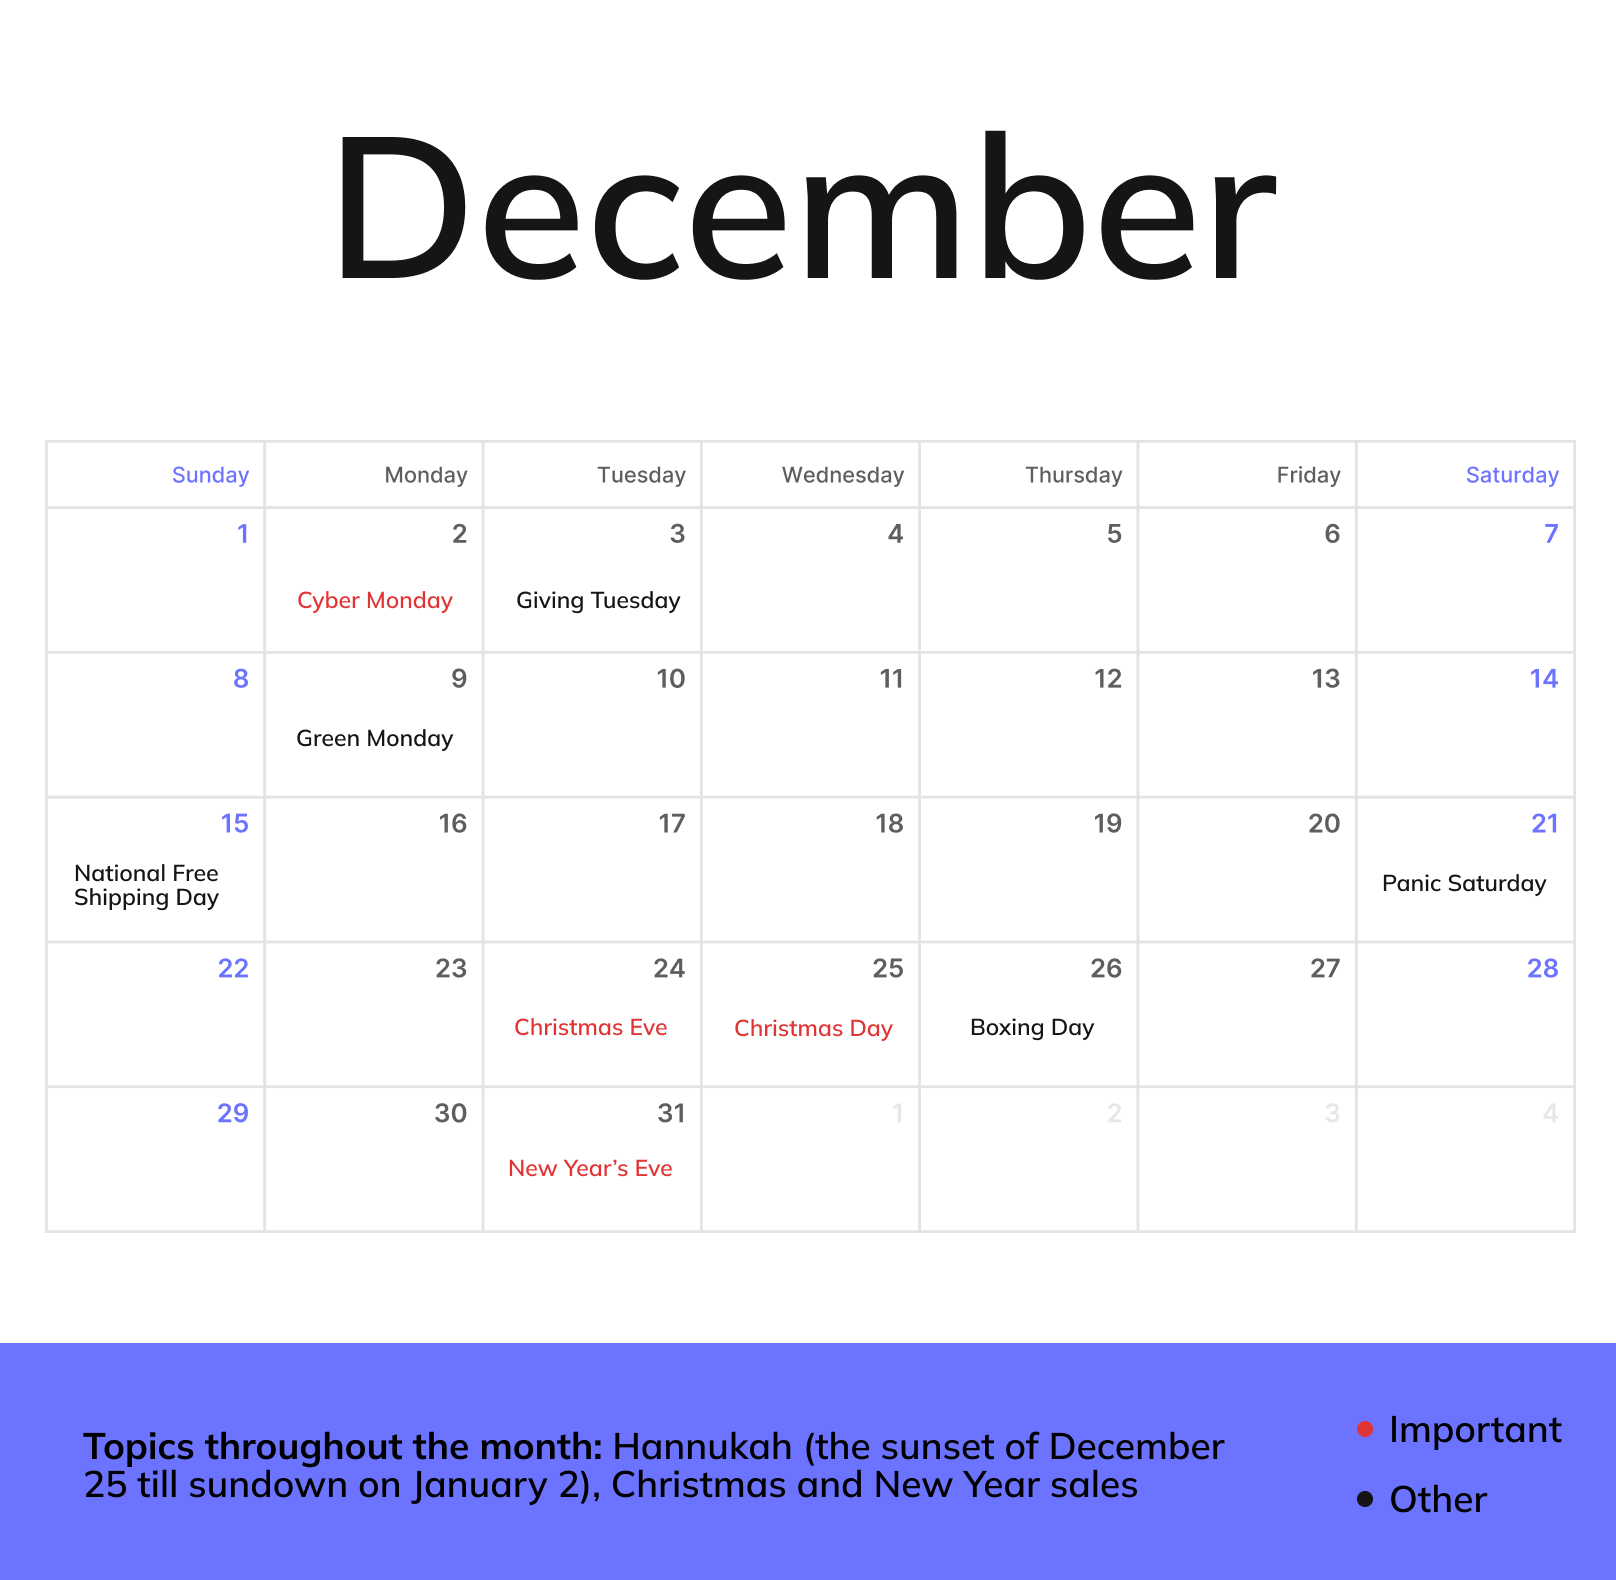 A December monthly calendar with holidays and topics throughout the month being Hannukah (the sunset of December 25 till sundown on January 2), Christmas and New Year sales